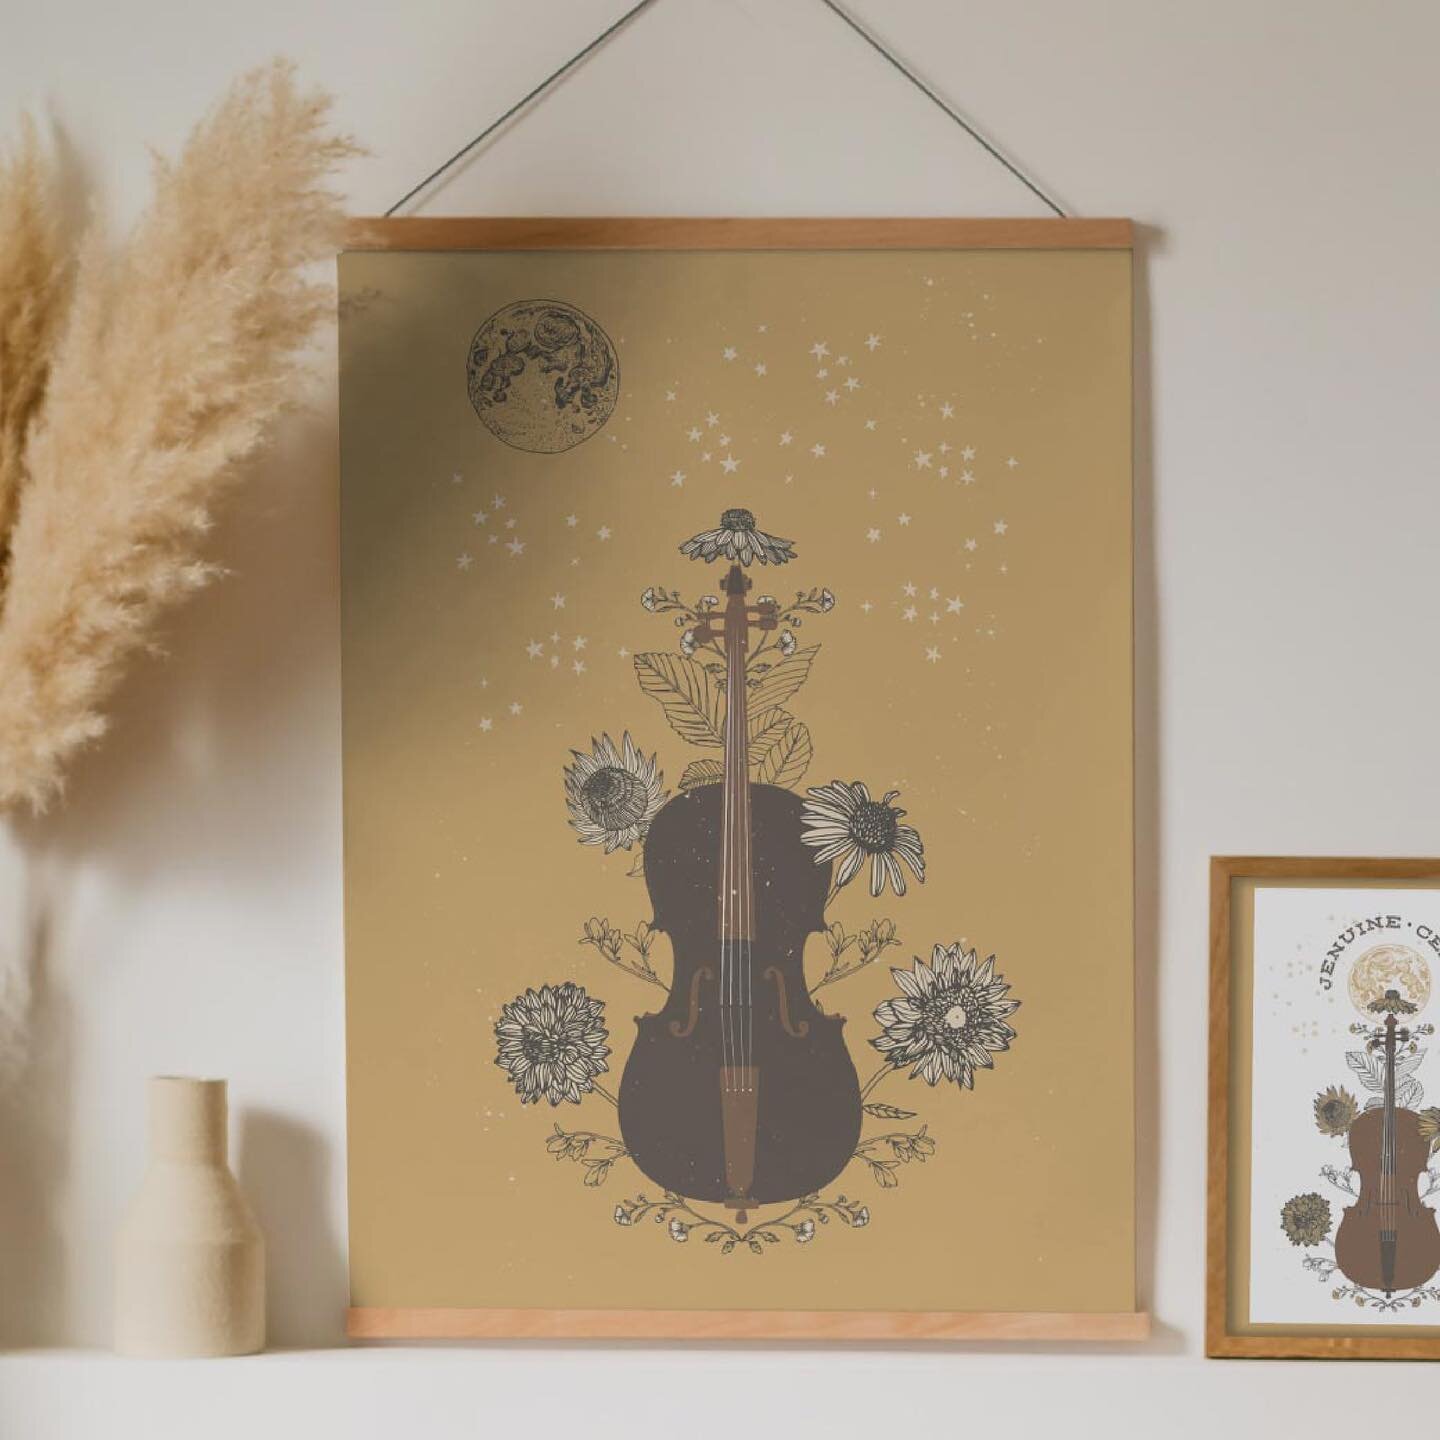 Fun illustrations I did a few years ago after I signed up for a Christmas gift exchange and was chosen to give the talented @jenuinecello a gift. So I illustrated and printed her some fun cello posters and later conceptualized  some sticker ideas. 

